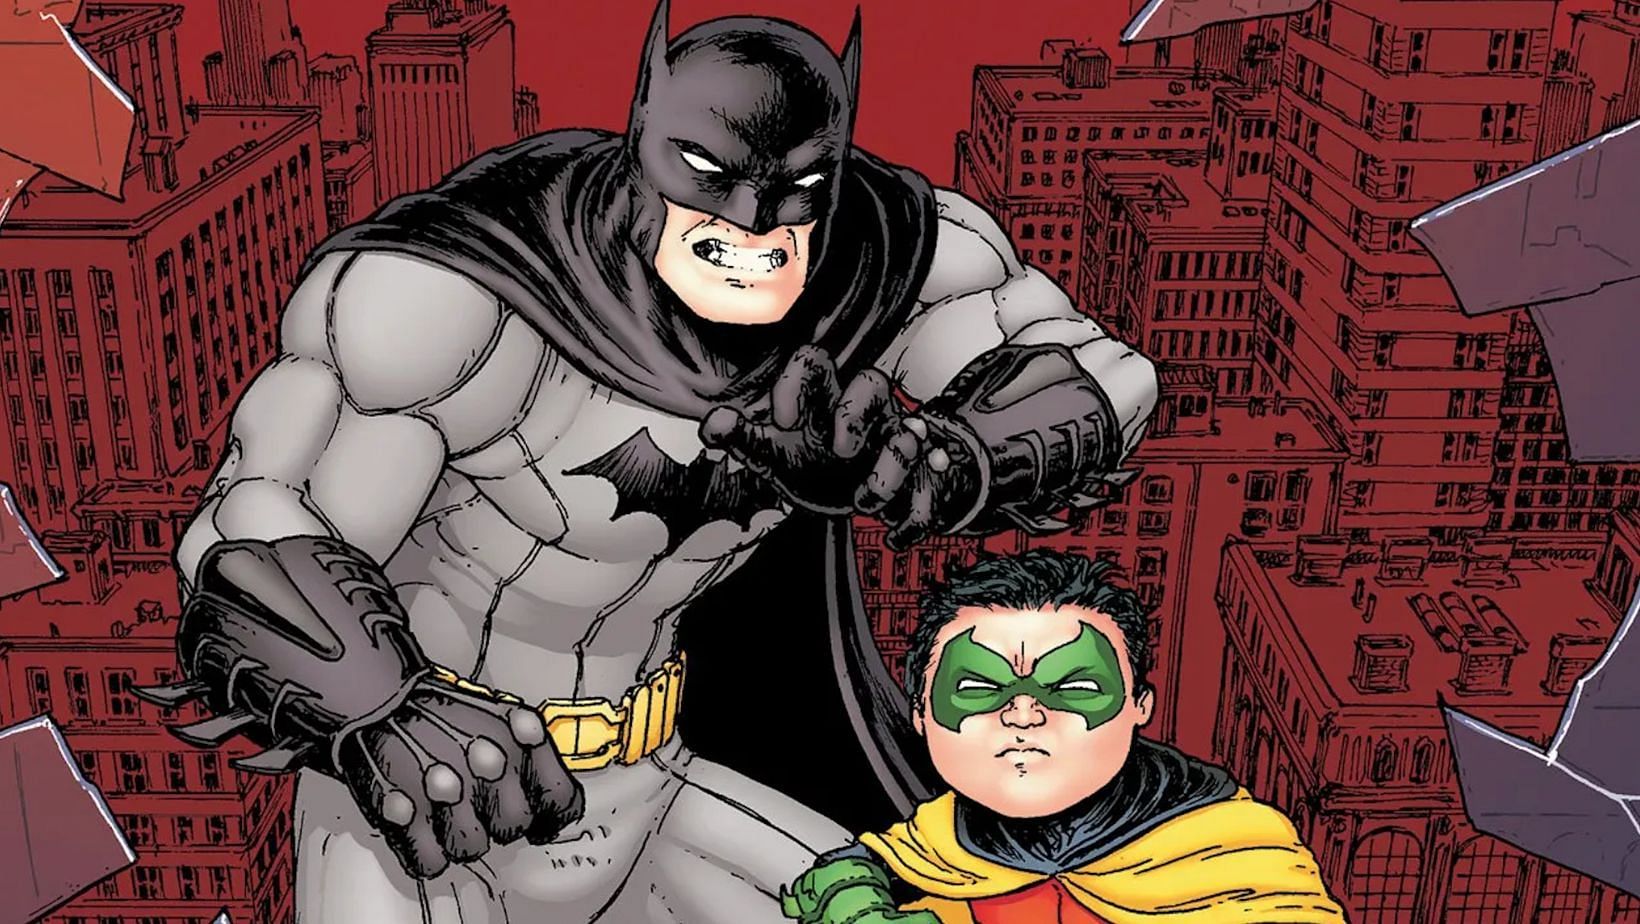 Batman and Robin team up in a father-son story (Image via DC Comics)